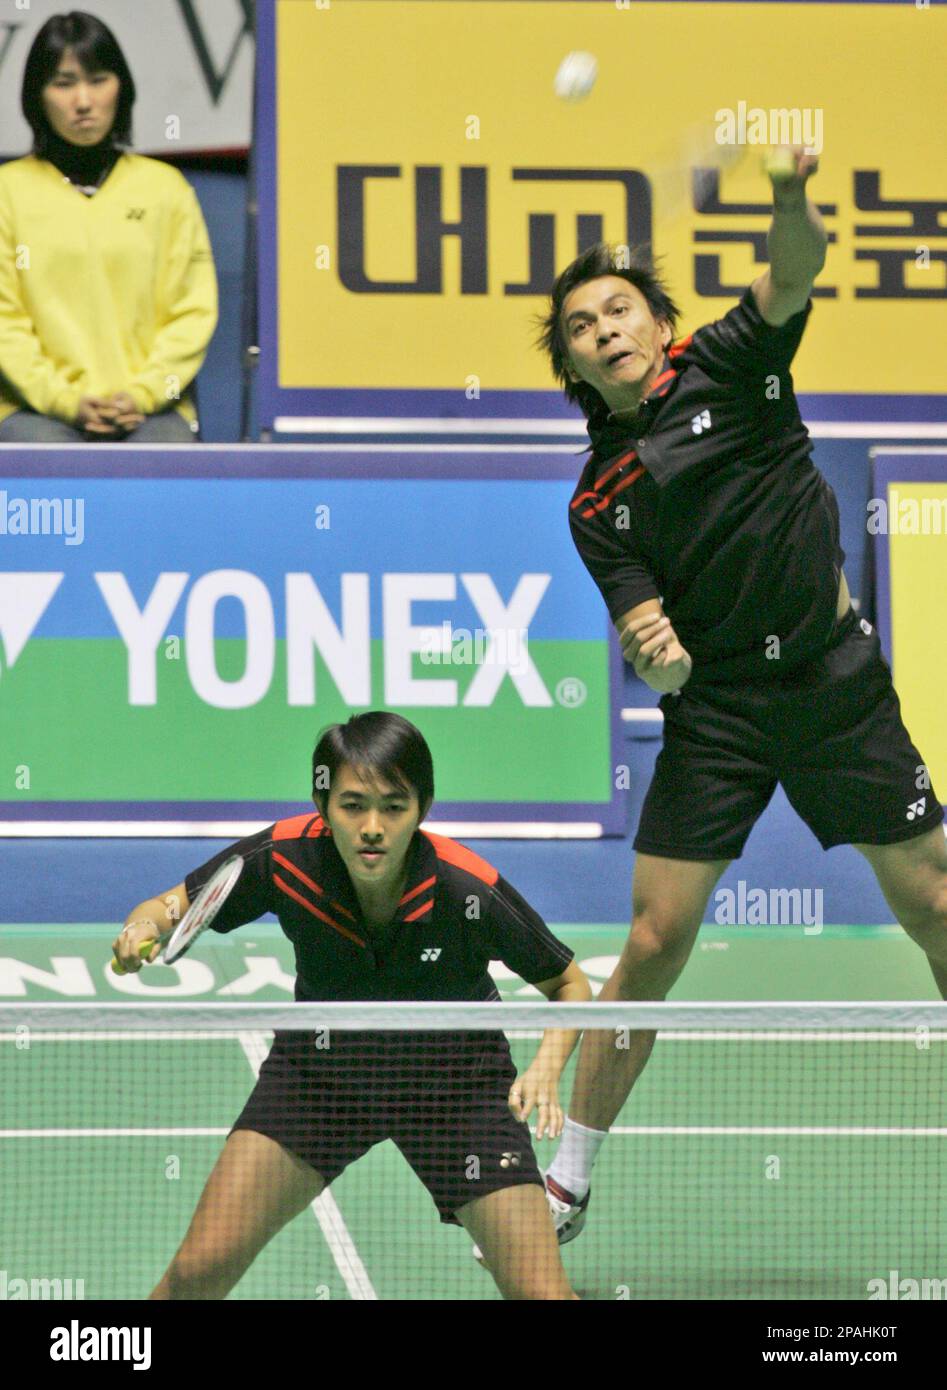 Indonesias Flandy Limpel, right, returns a shot as his teammate Vita Marissa looks on during the mixed double final match of the Korea Open Badminton against South Koreas Lee Hyo-jung and Lee